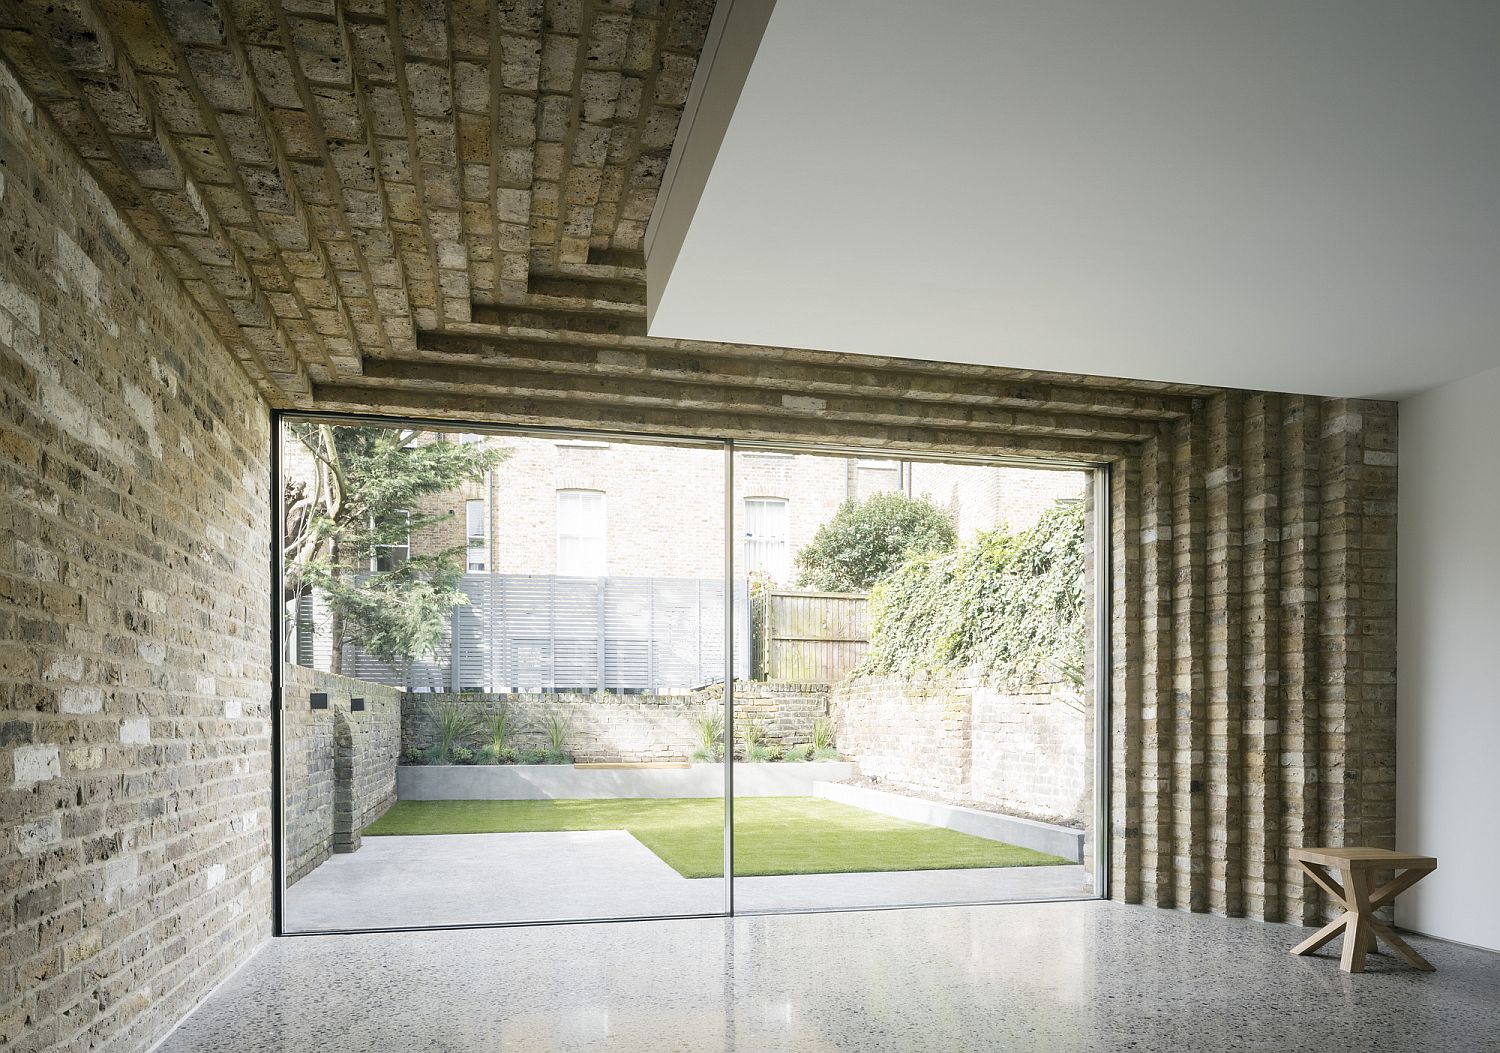 Staggered-brick-extension-viewed-from-the-interior